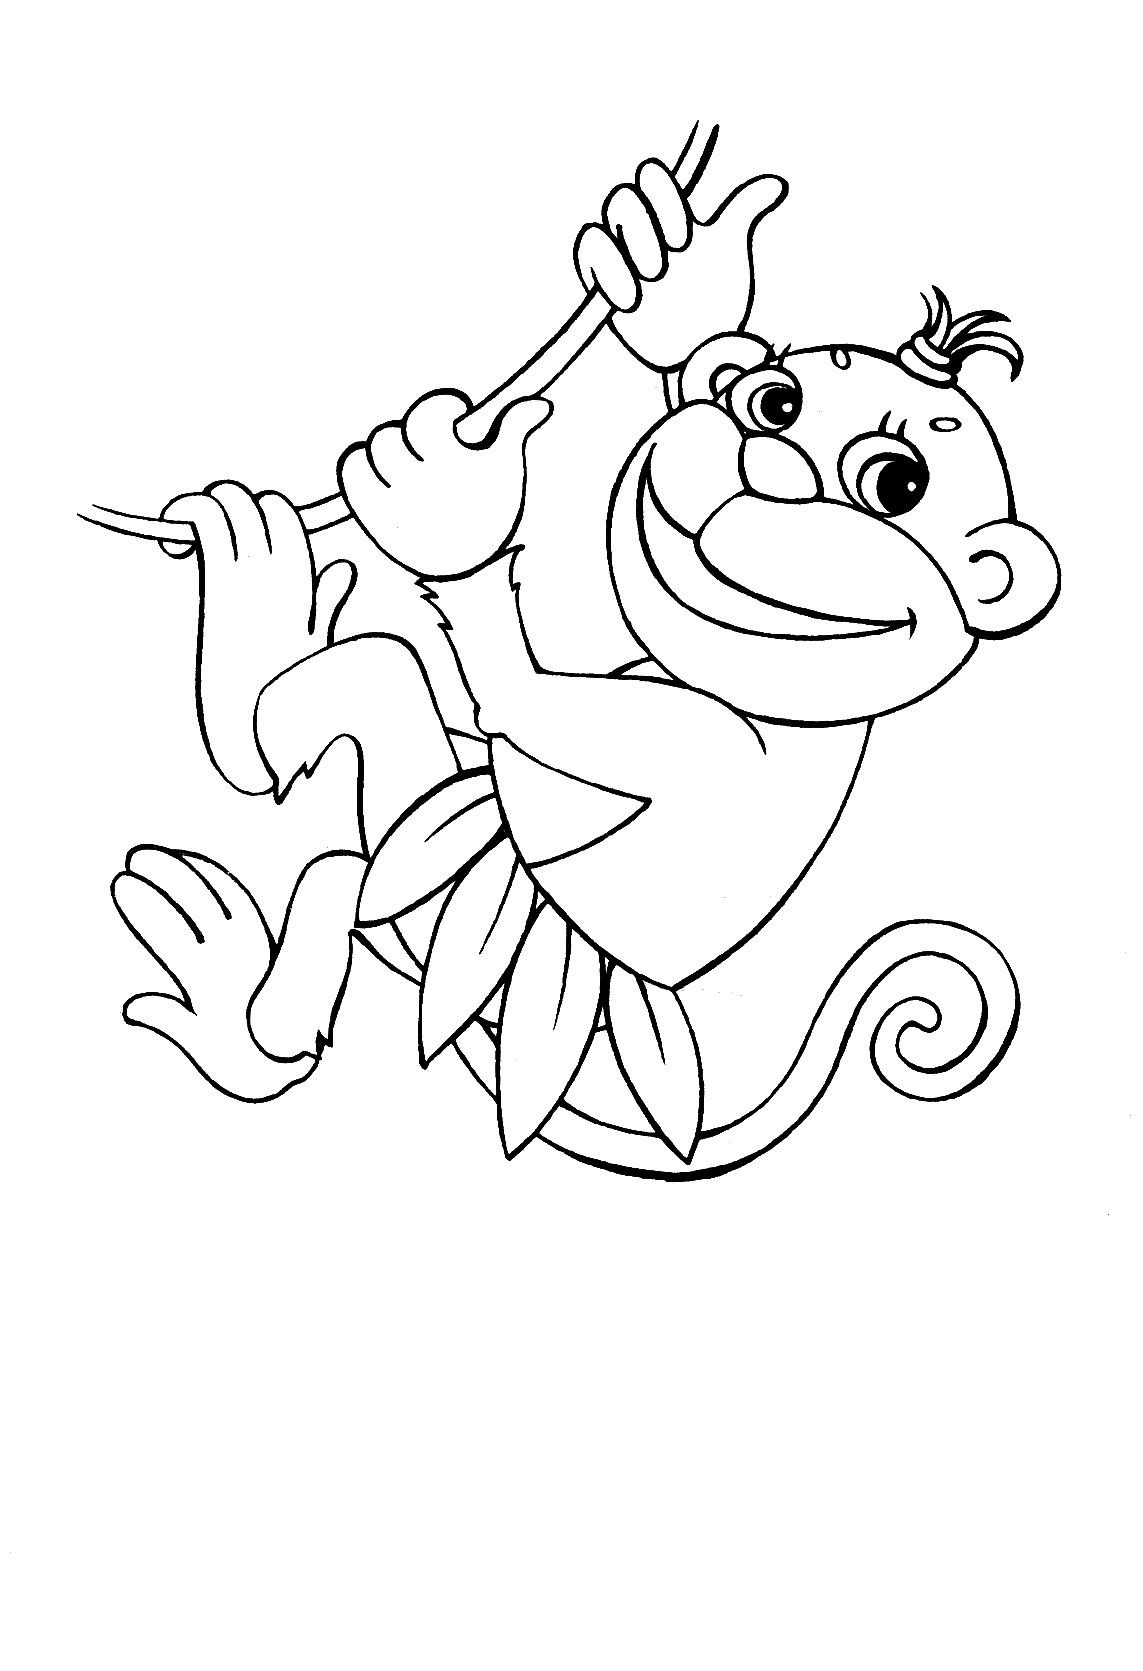 coloring pages of monkeys free printable monkey coloring pages for kids cool2bkids of coloring pages monkeys 